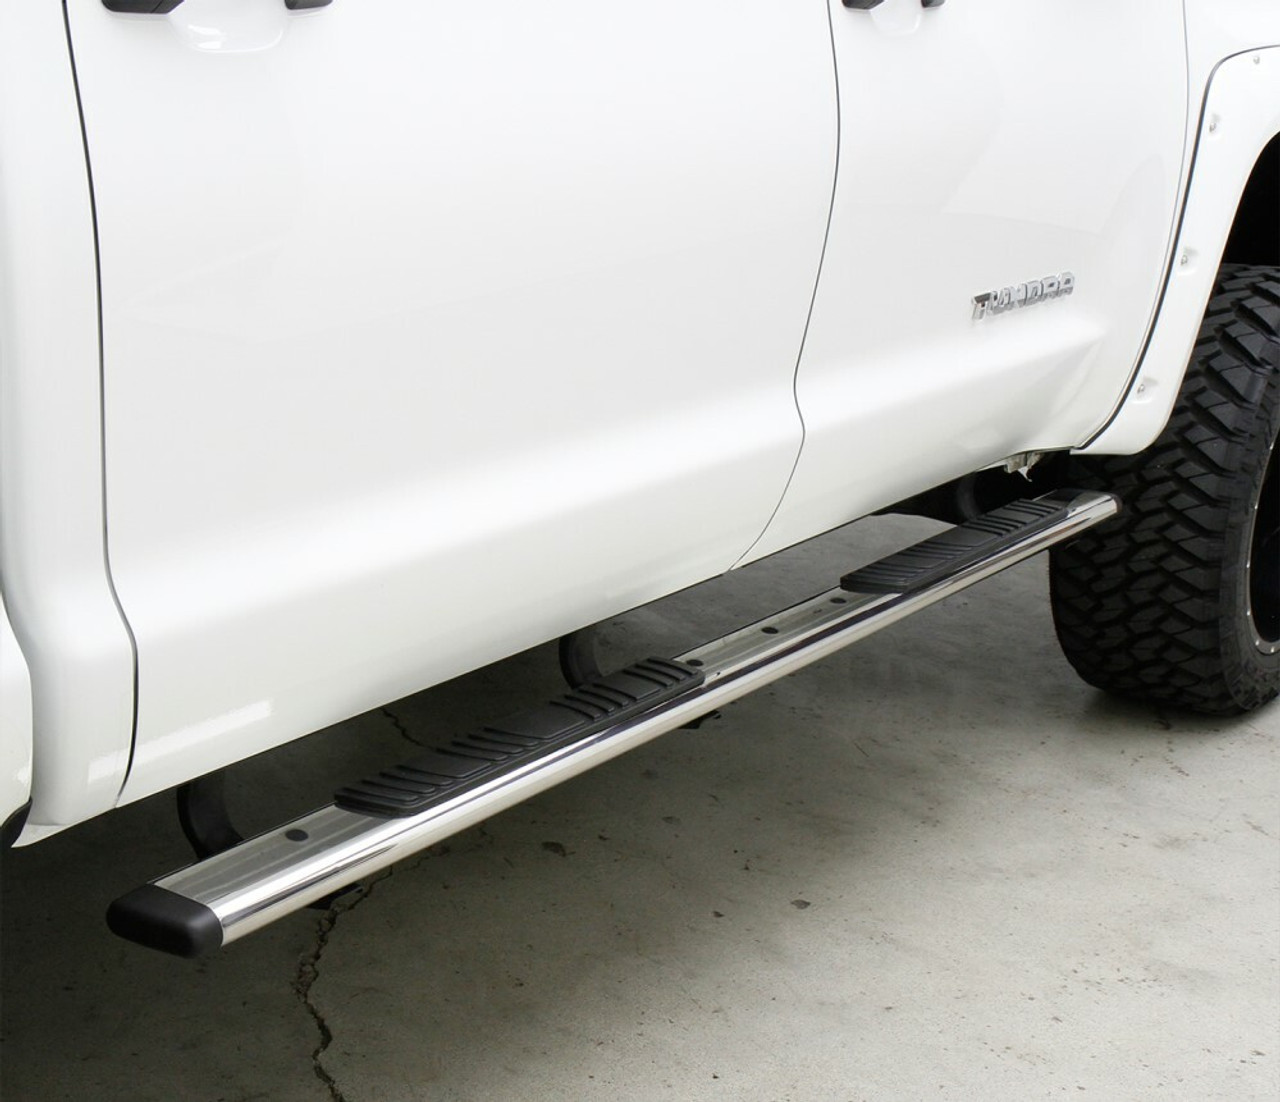 Go Rhino 685404780T Chevy, Silverado 2500HD, 3500HD, 2020-2021, 5 inch OE Xtreme Low Profile - Complete Kit: Galvanized Steel, Textured black, 650080T bars + 6840475 OE Xtreme Brackets. 5 inch x 80 inch Bar, Diesel or Gas, New Body Style Only